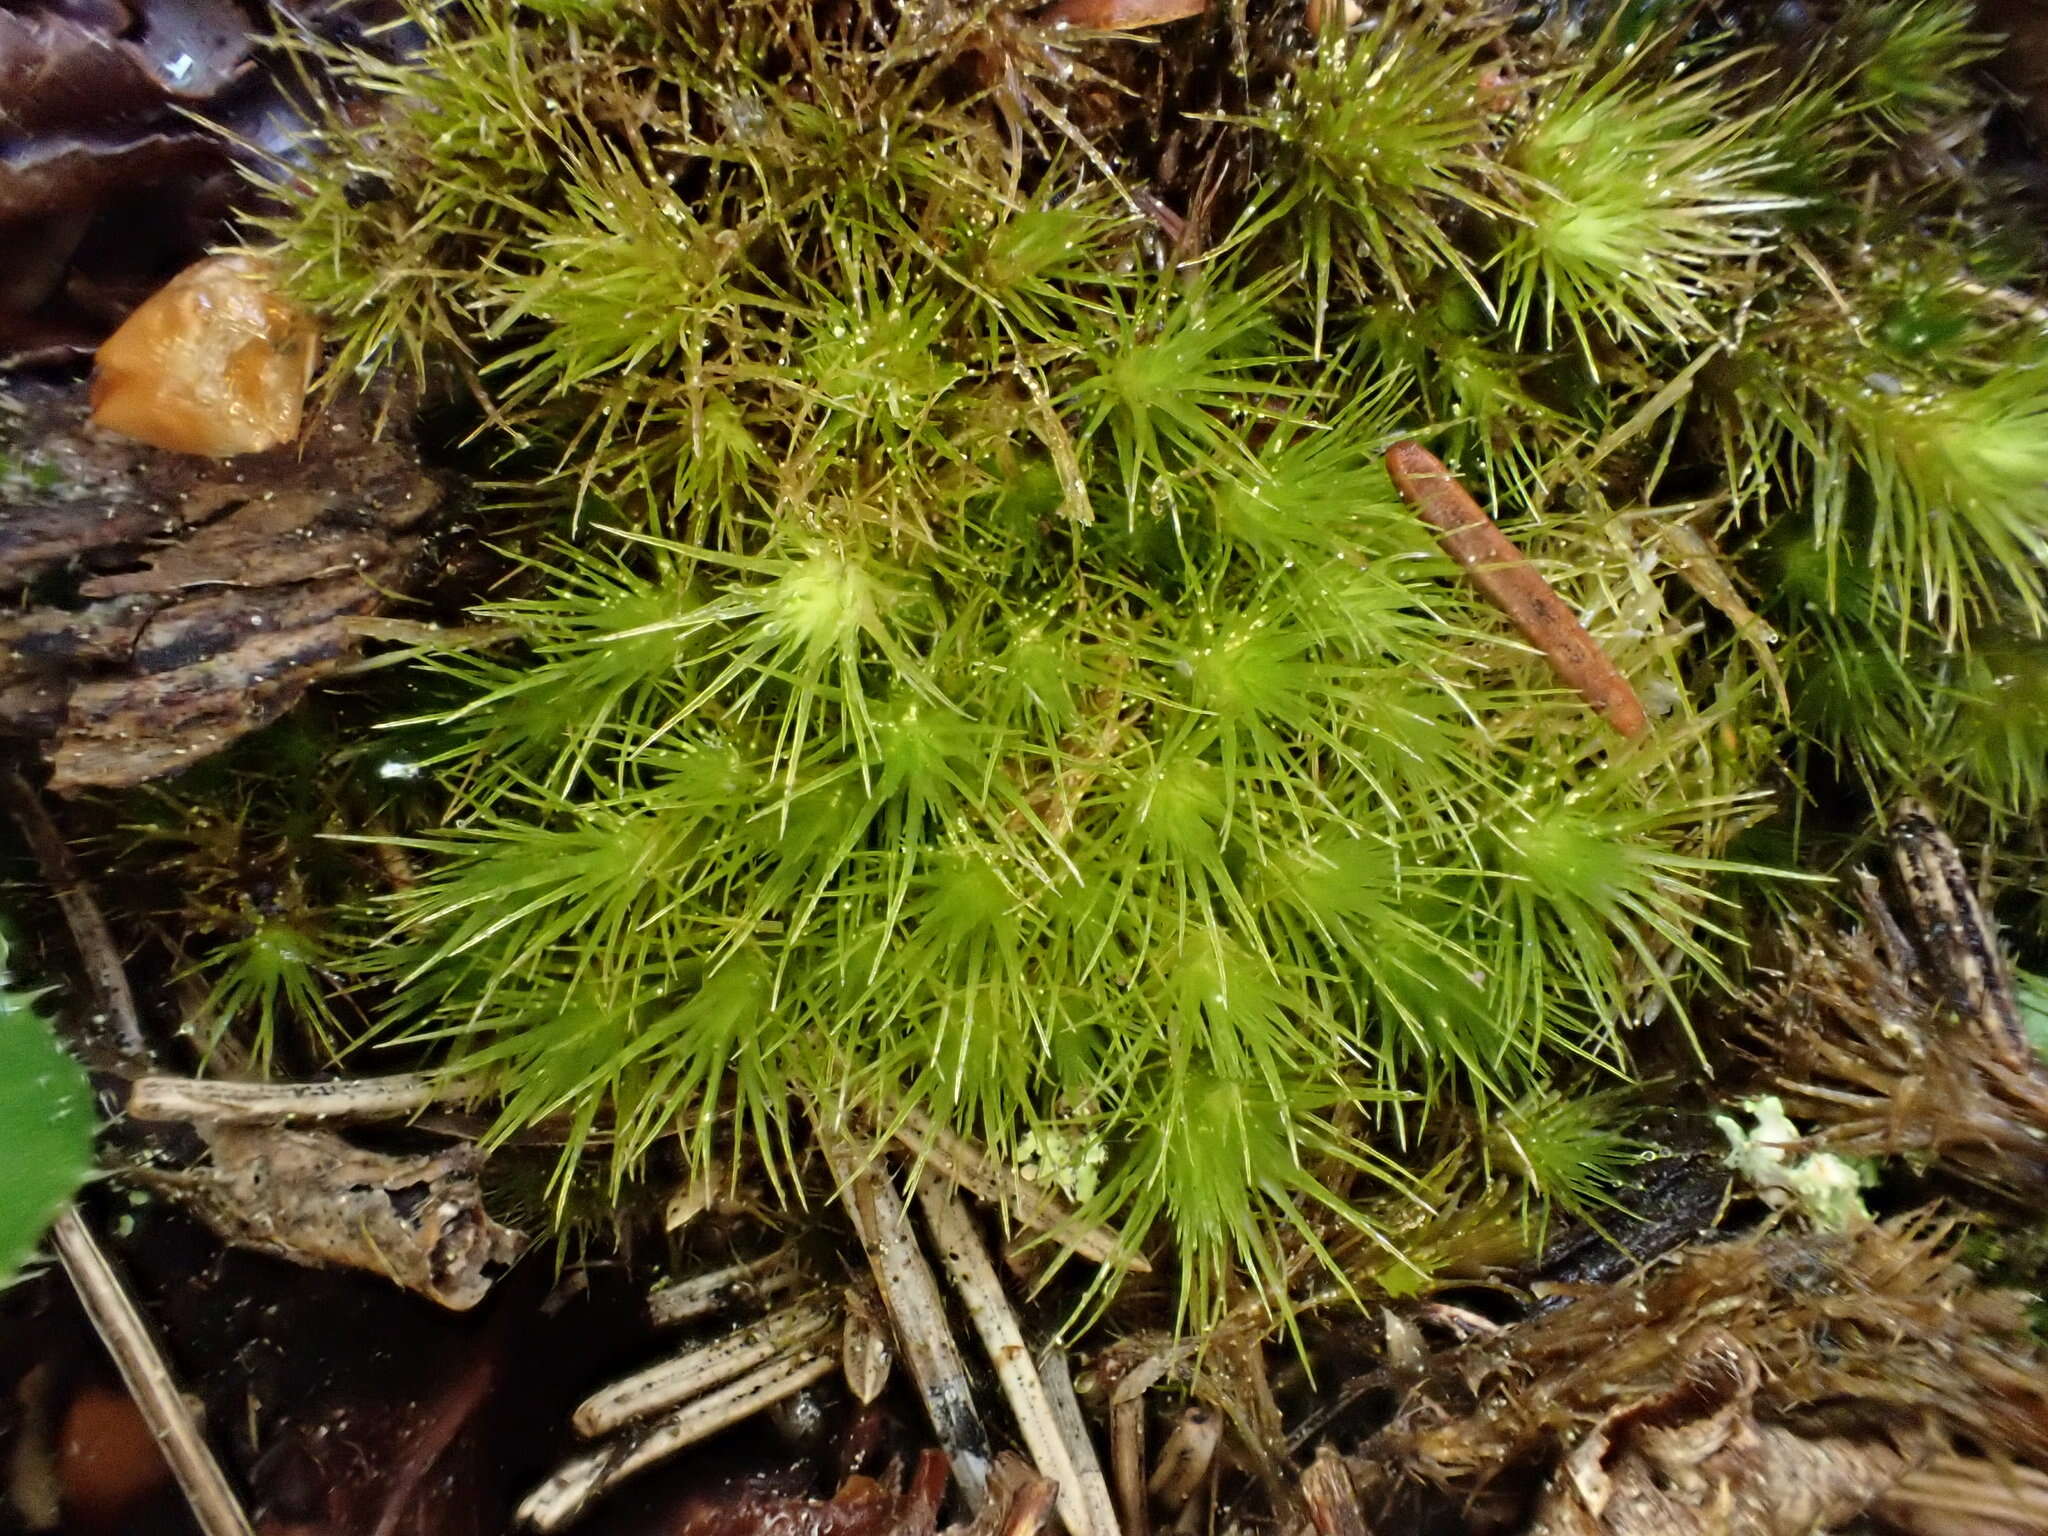 Image of brittle swan-neck moss